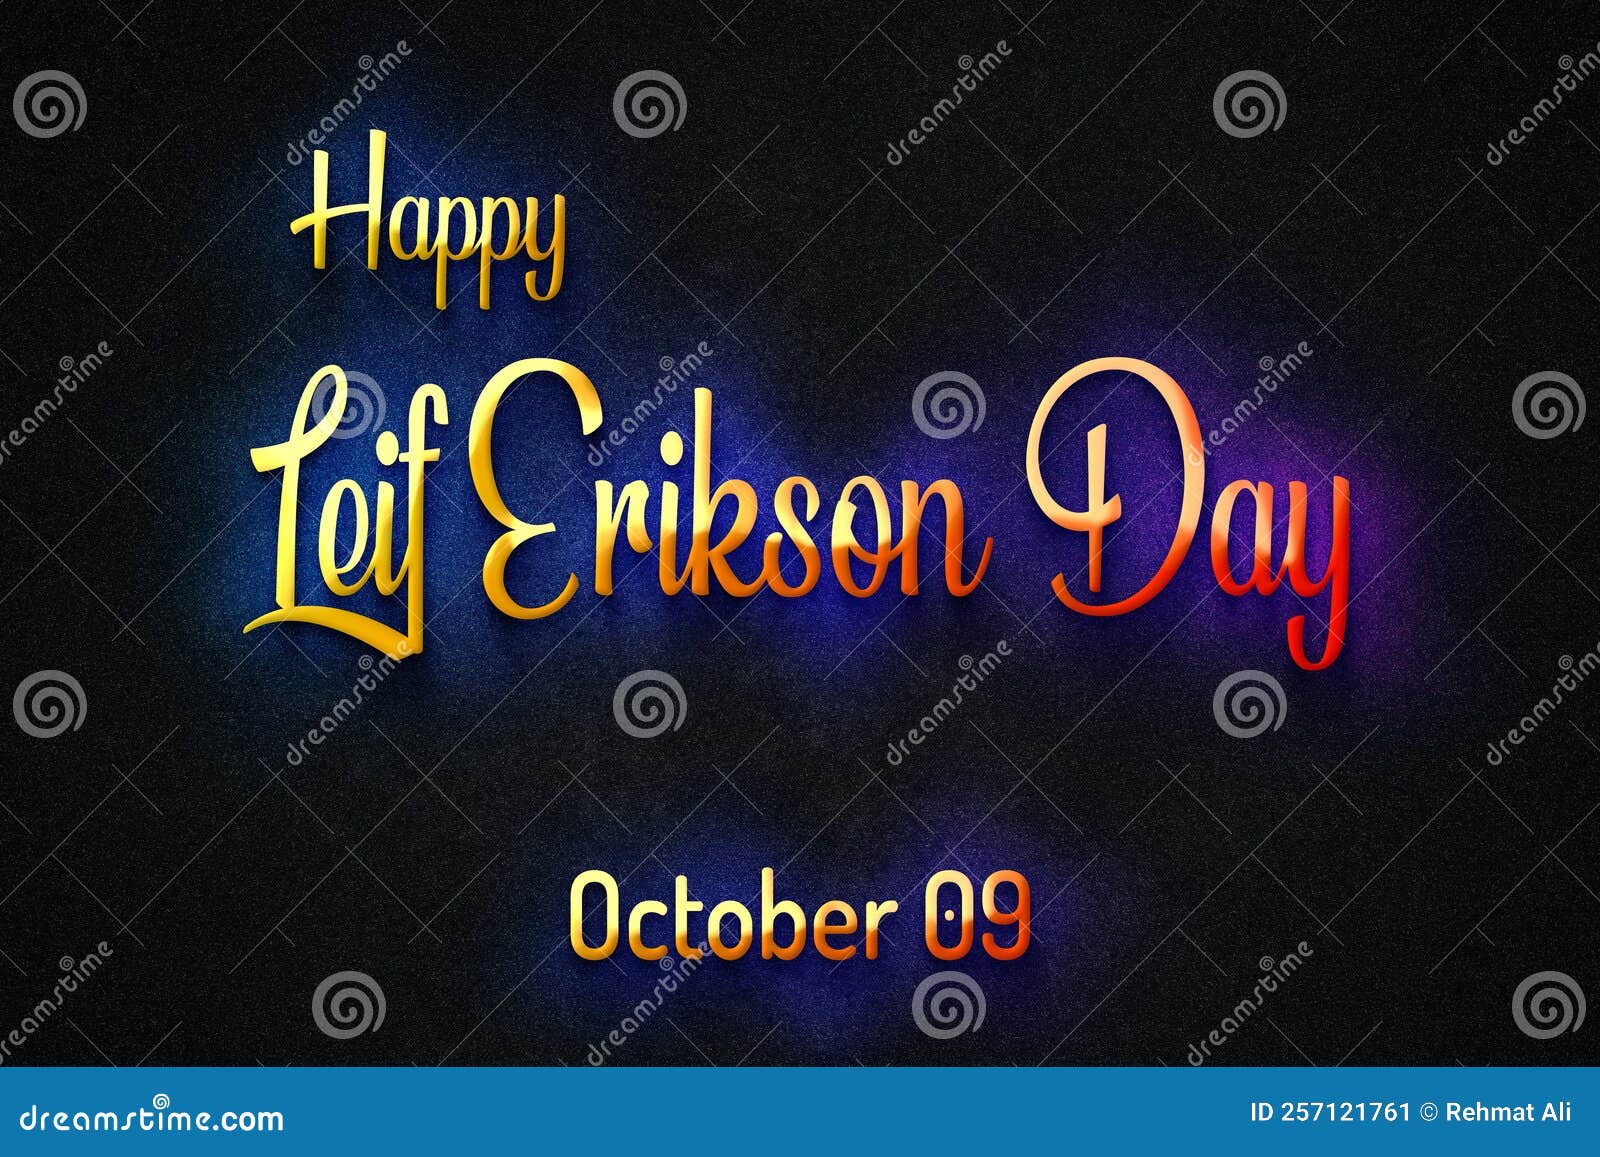 happy-leif-erikson-day-october-09-empty-space-for-text-copy-space